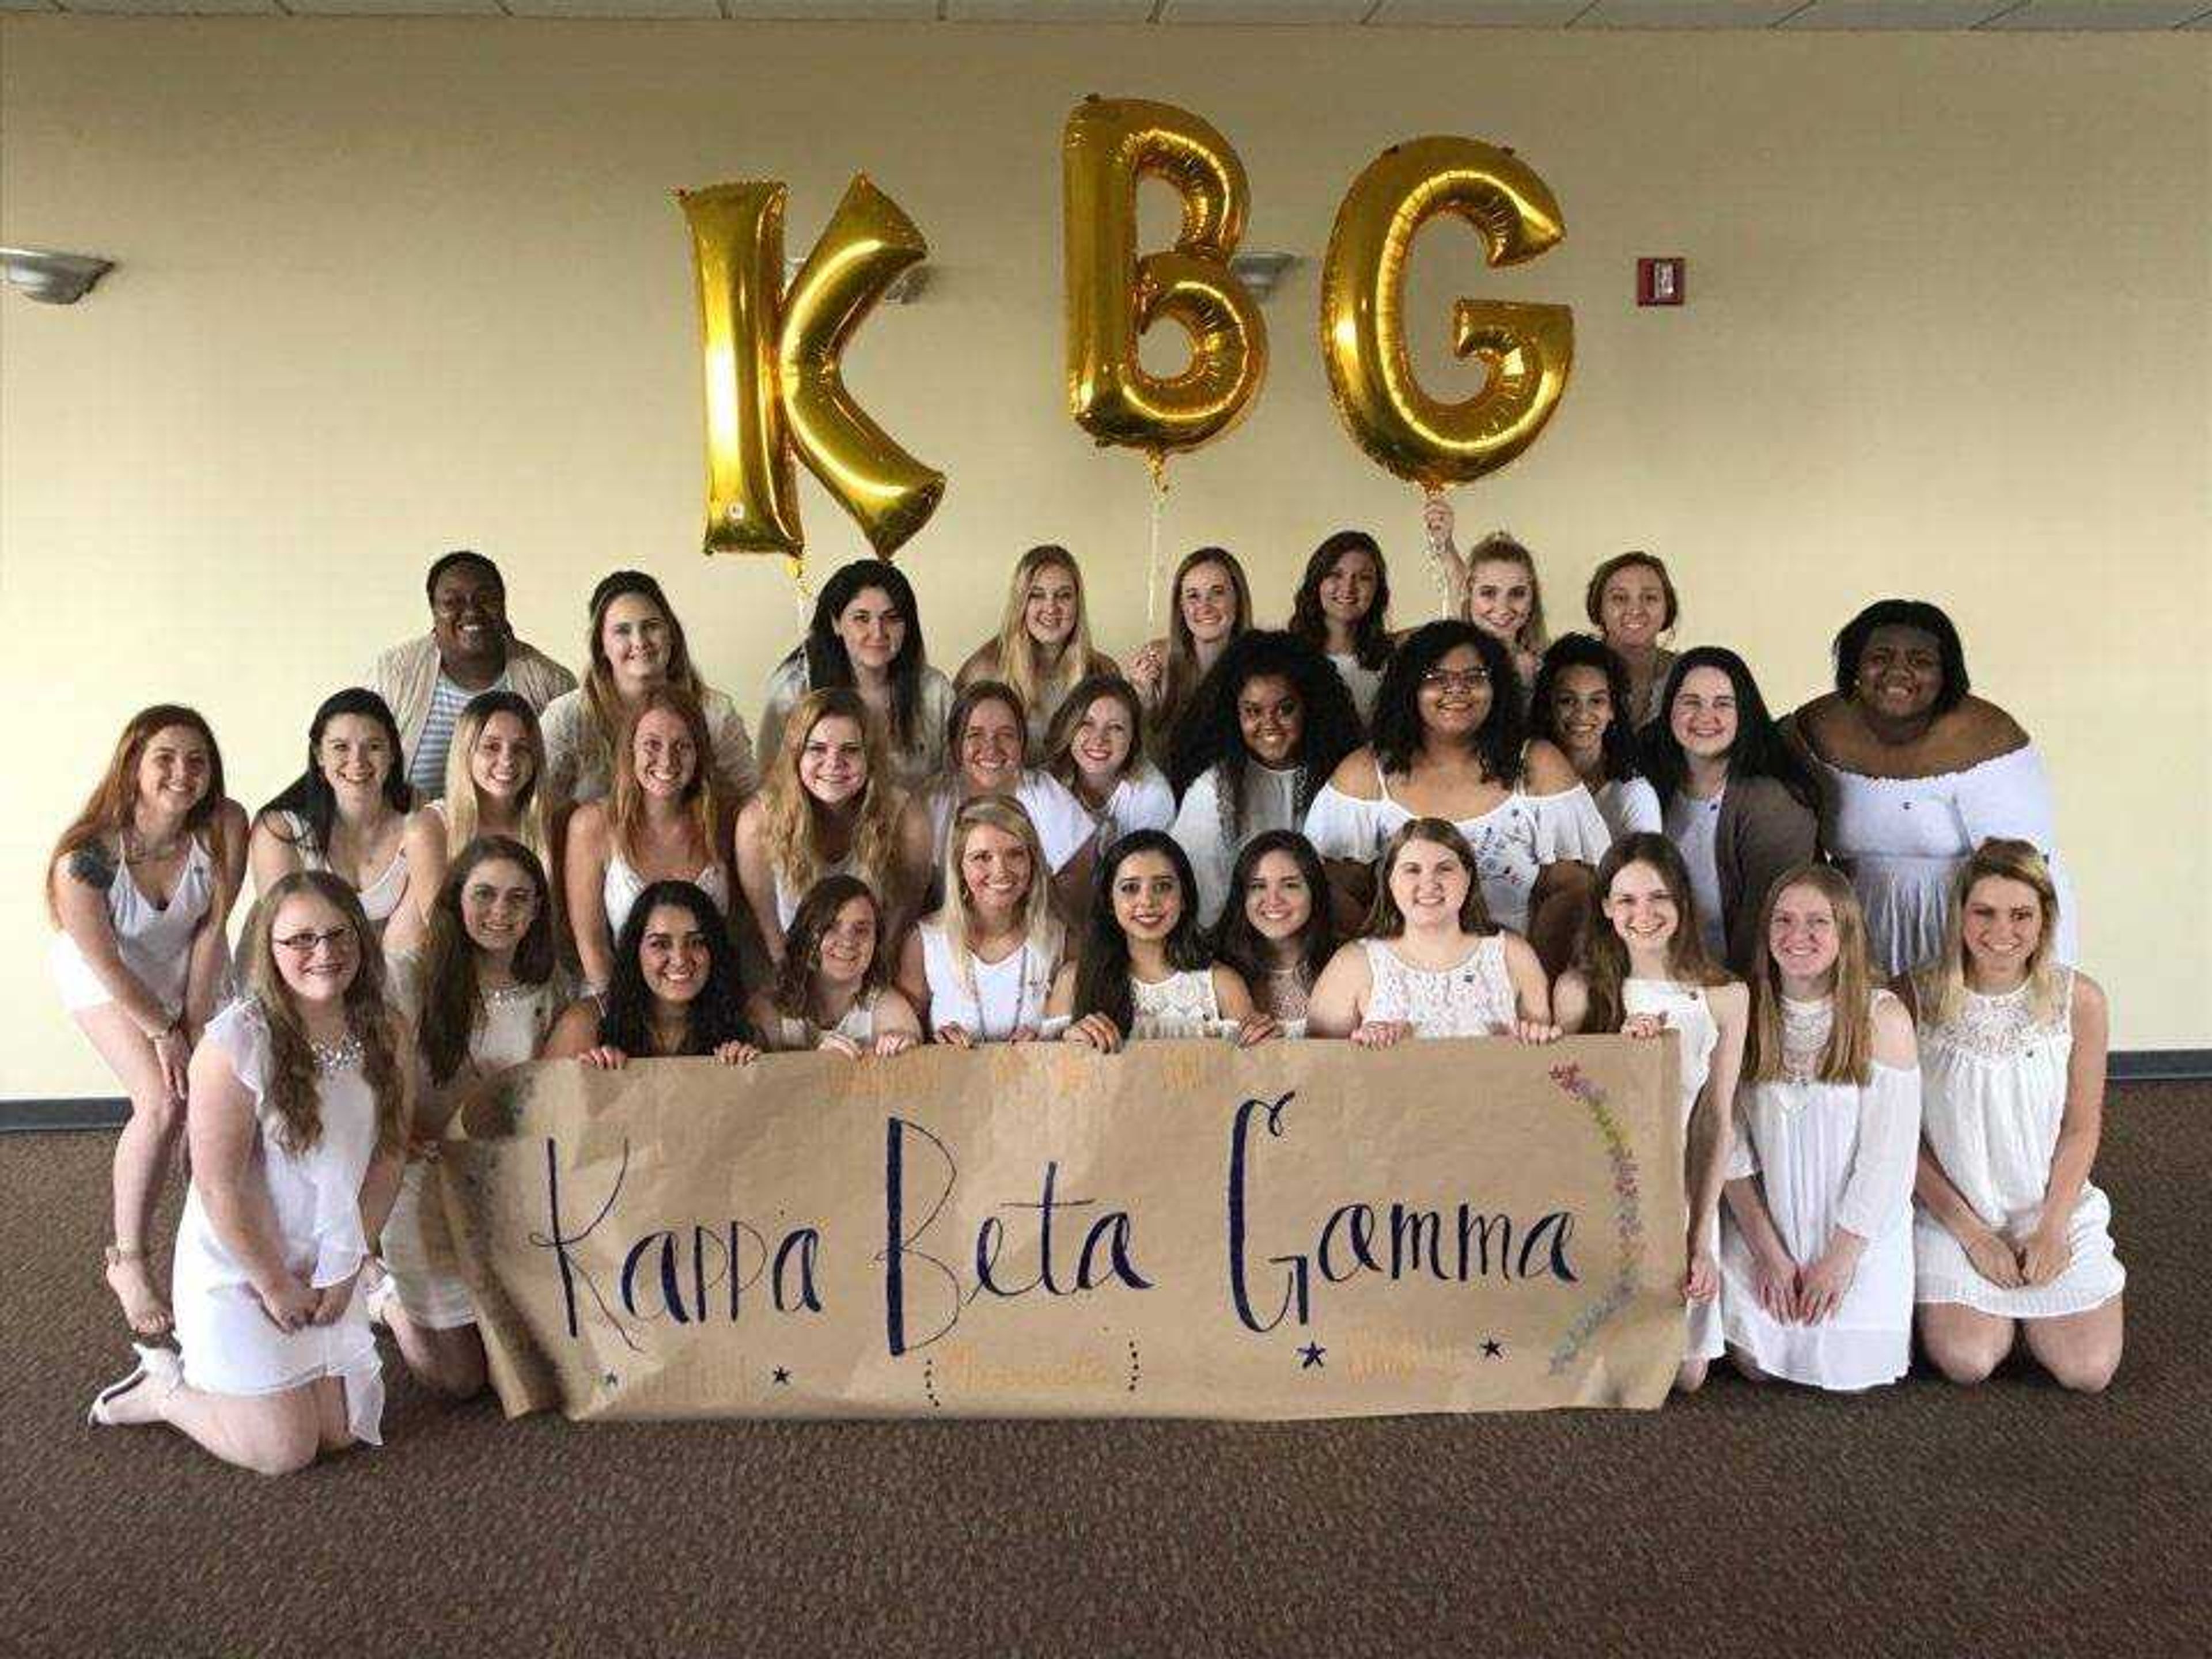 Non-Panhellenic sorority comes to campus